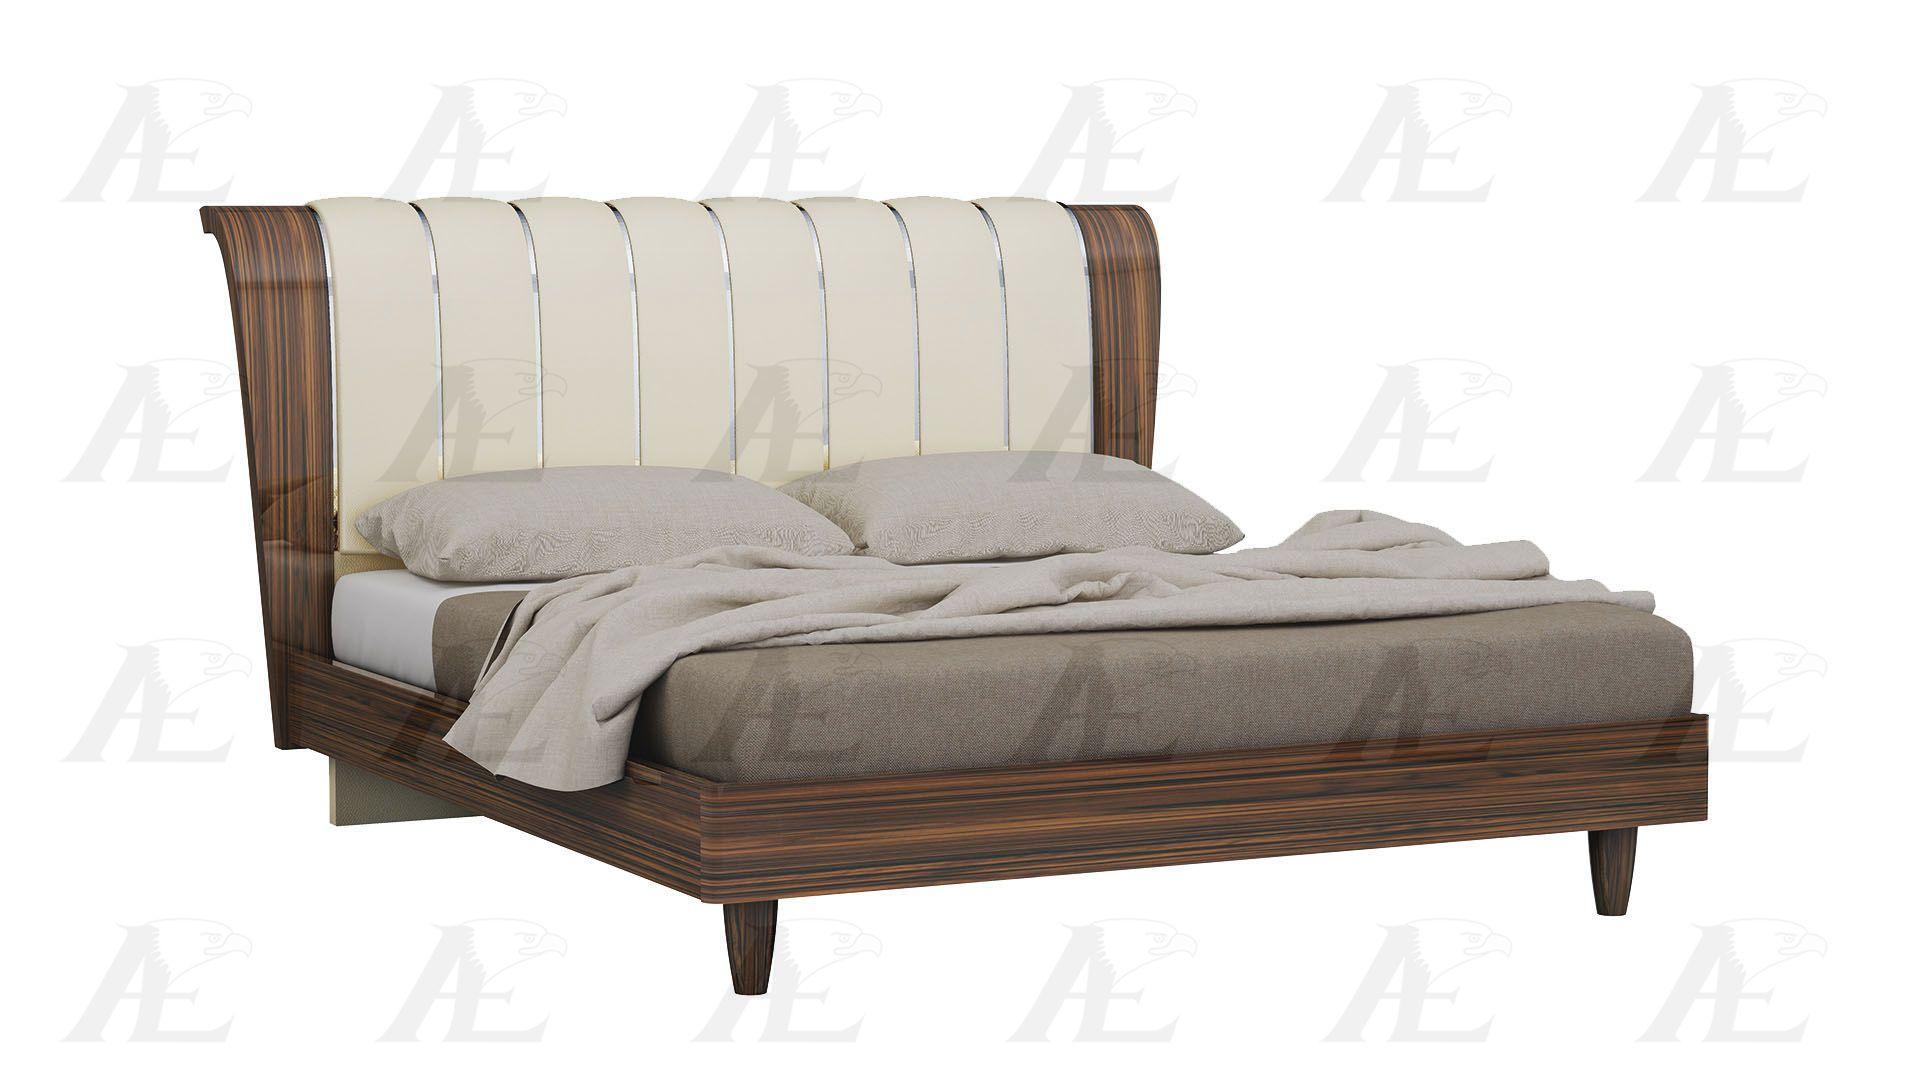 

    
American Eagle Furniture B-P101 Ivory Brown Rosewood Queen Size Platform Bed Lacquer finish
